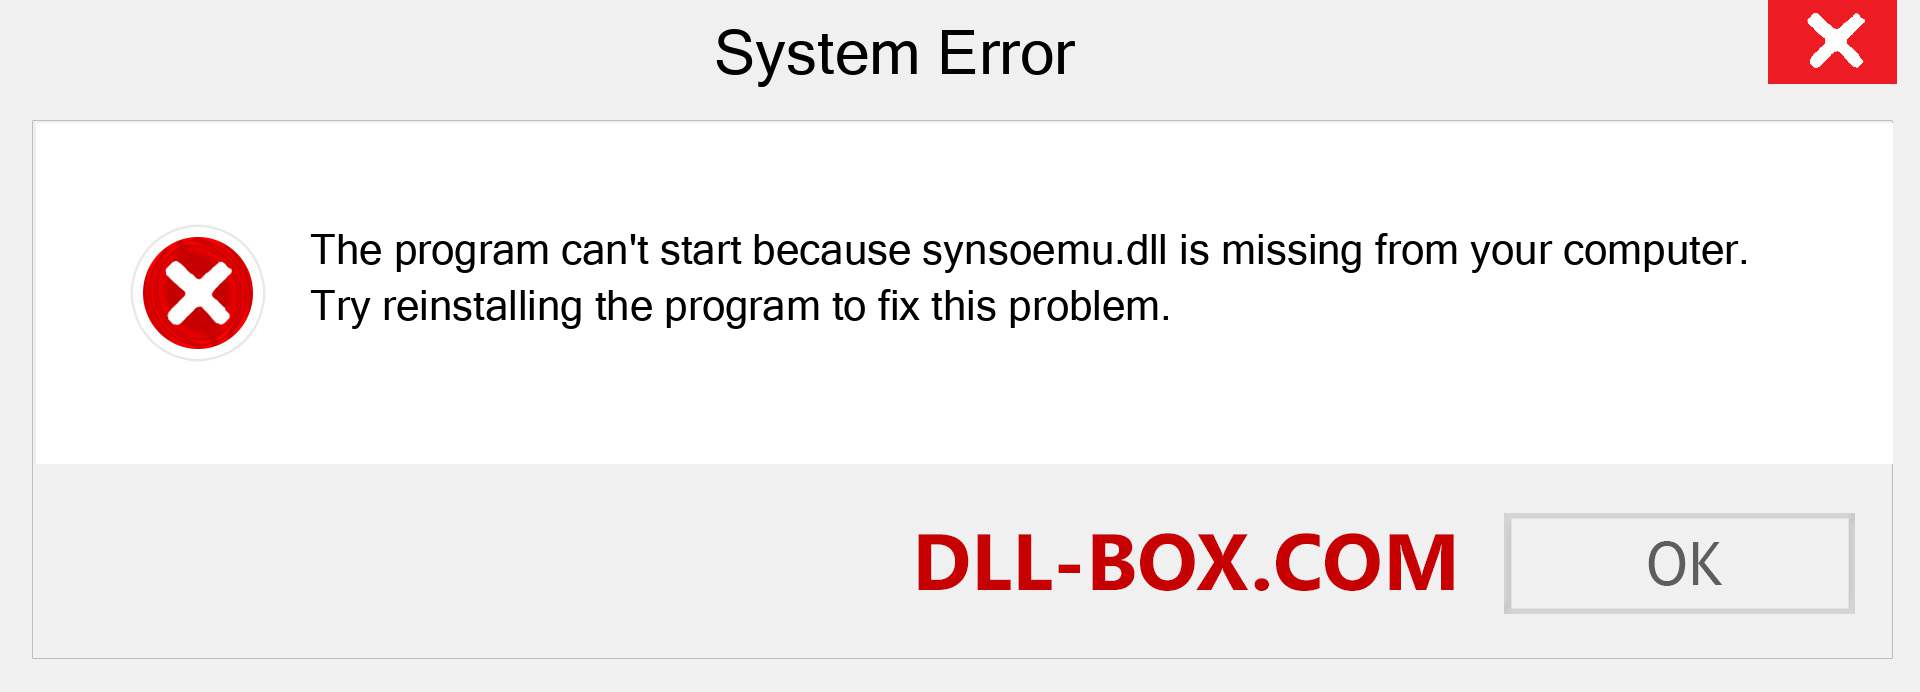  synsoemu.dll file is missing?. Download for Windows 7, 8, 10 - Fix  synsoemu dll Missing Error on Windows, photos, images